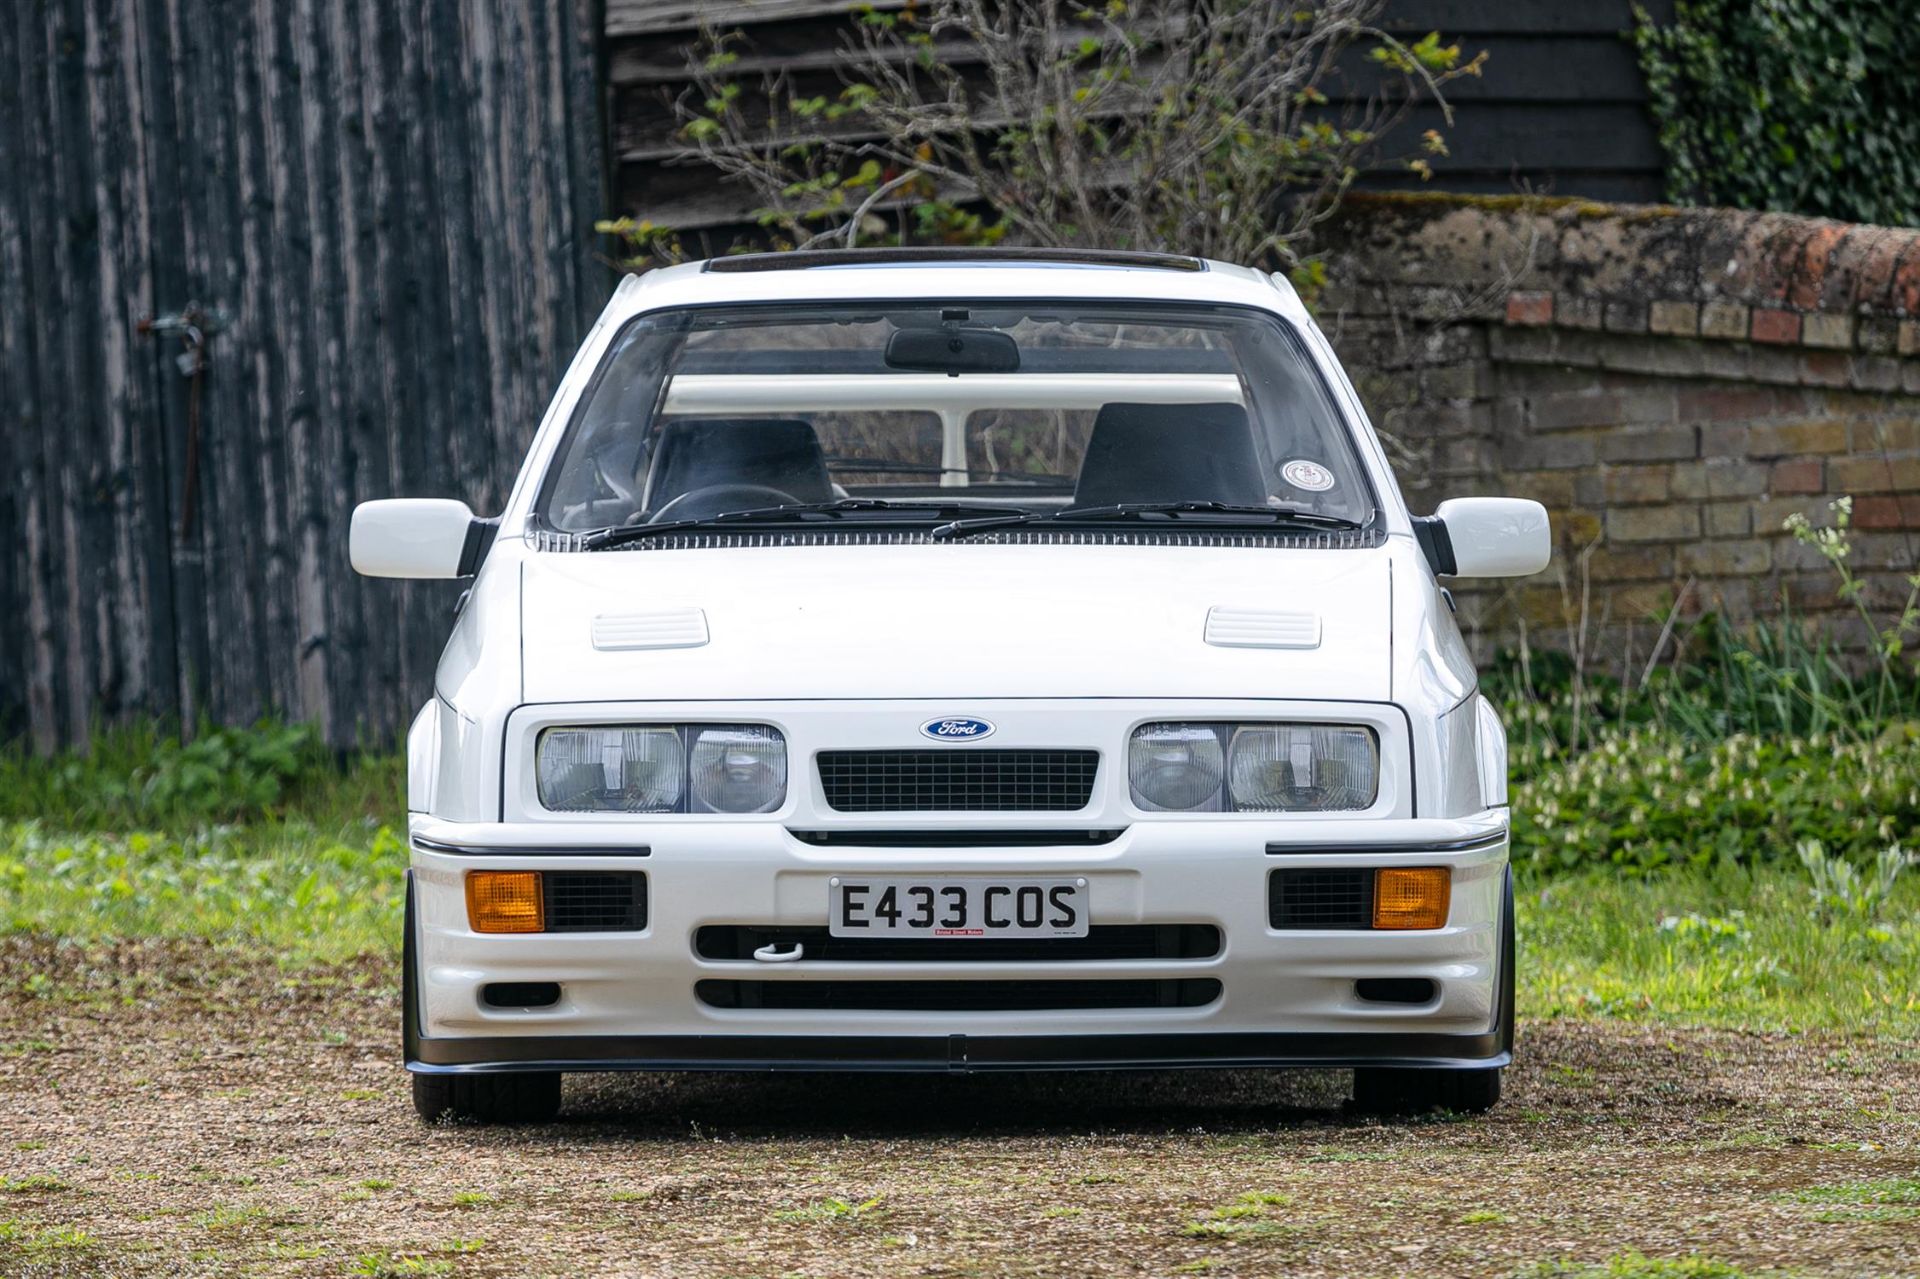 1987 Ford Sierra RS500 Cosworth #433 - 12,805 Miles - Image 6 of 10